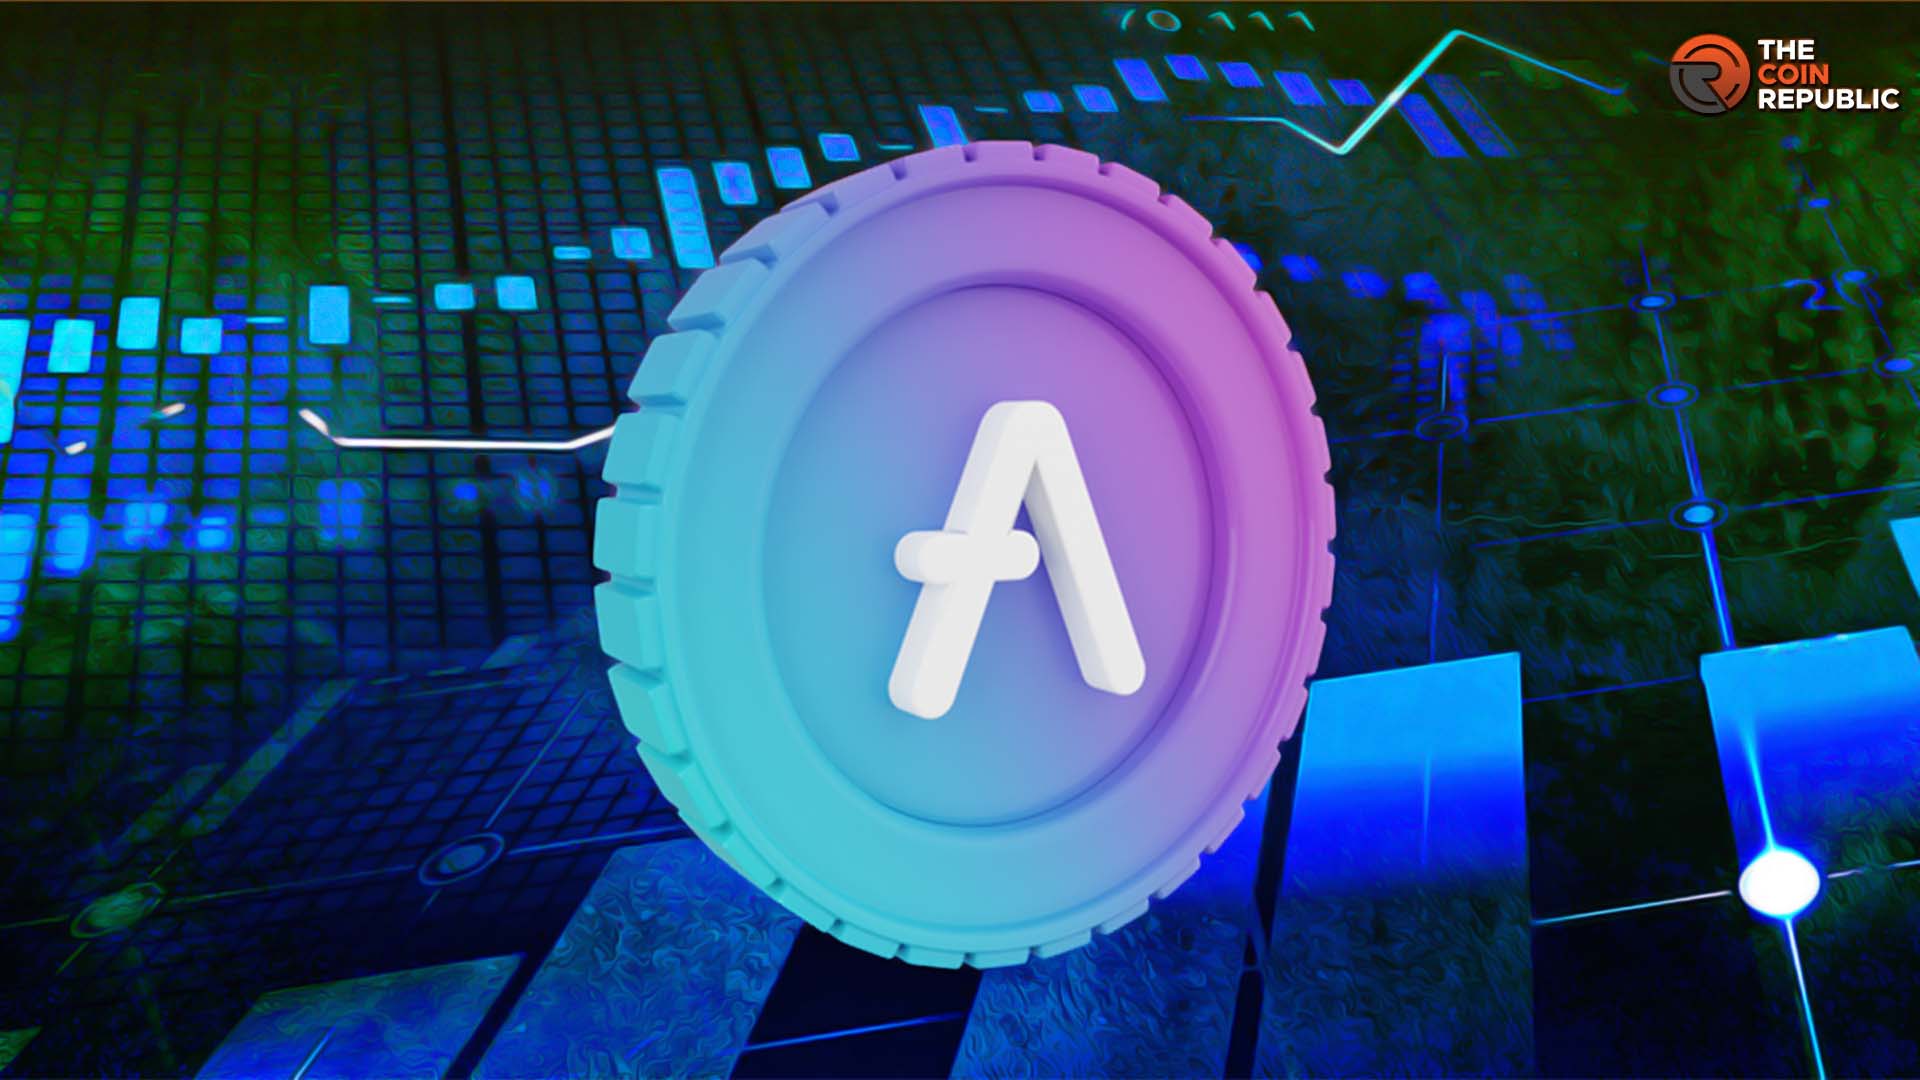 AAVE Price Prediction: Will GHO Pave AAVE’s Way to $1000?